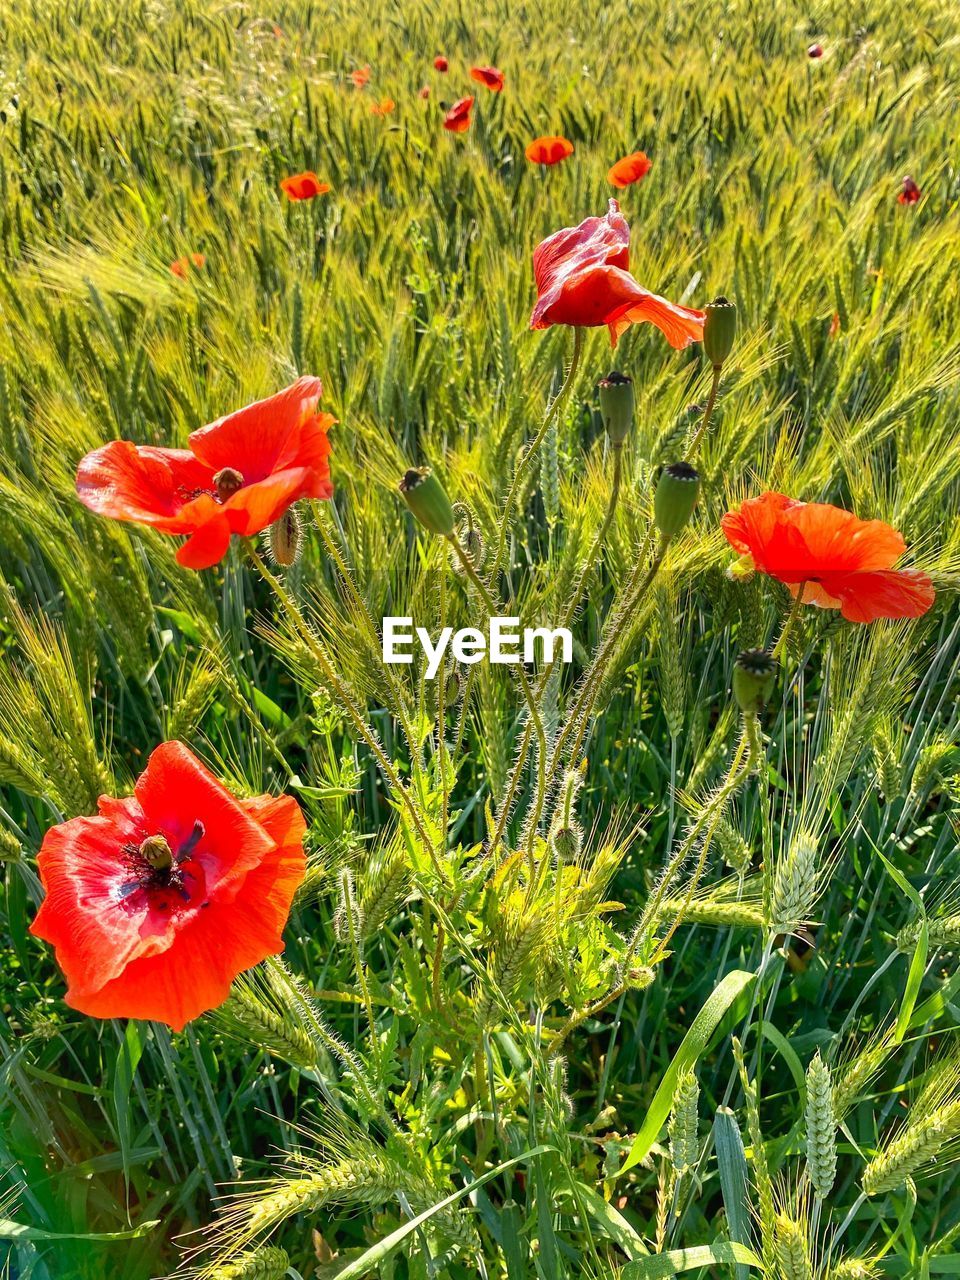 plant, growth, flower, flowering plant, beauty in nature, field, meadow, red, land, nature, poppy, grass, fragility, green, freshness, prairie, petal, day, no people, flower head, inflorescence, grassland, high angle view, wildflower, outdoors, close-up, tranquility, lawn, sunlight